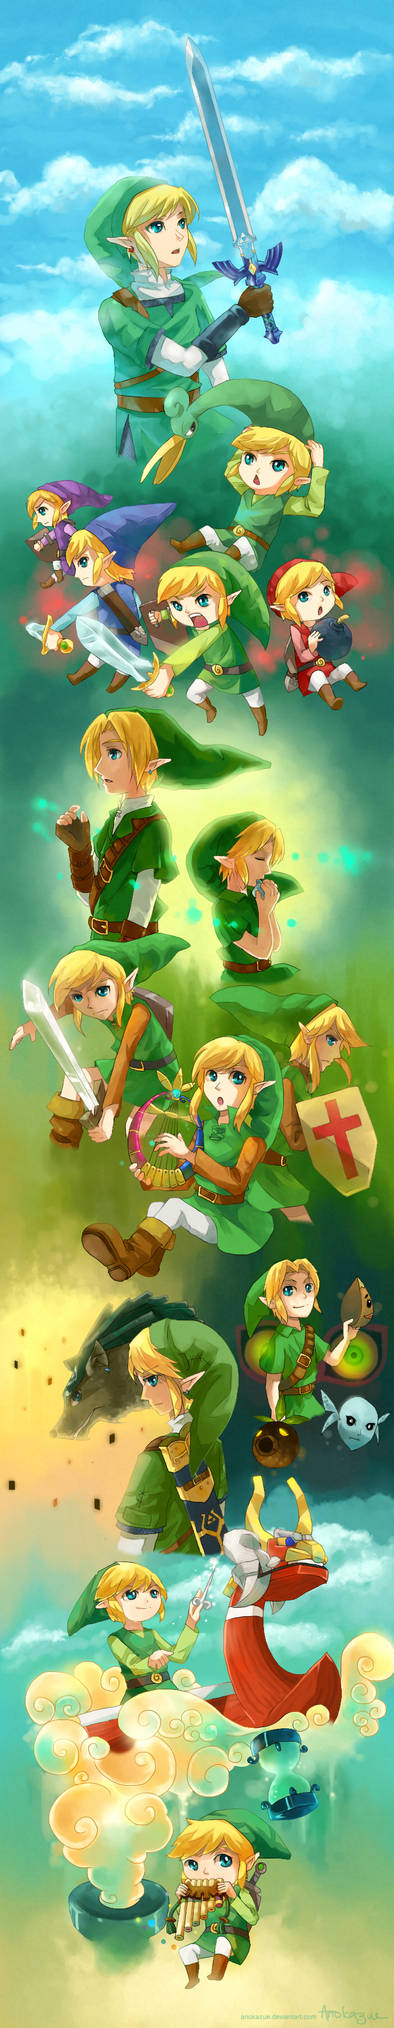 25 years of Legend of Zelda by anocurry